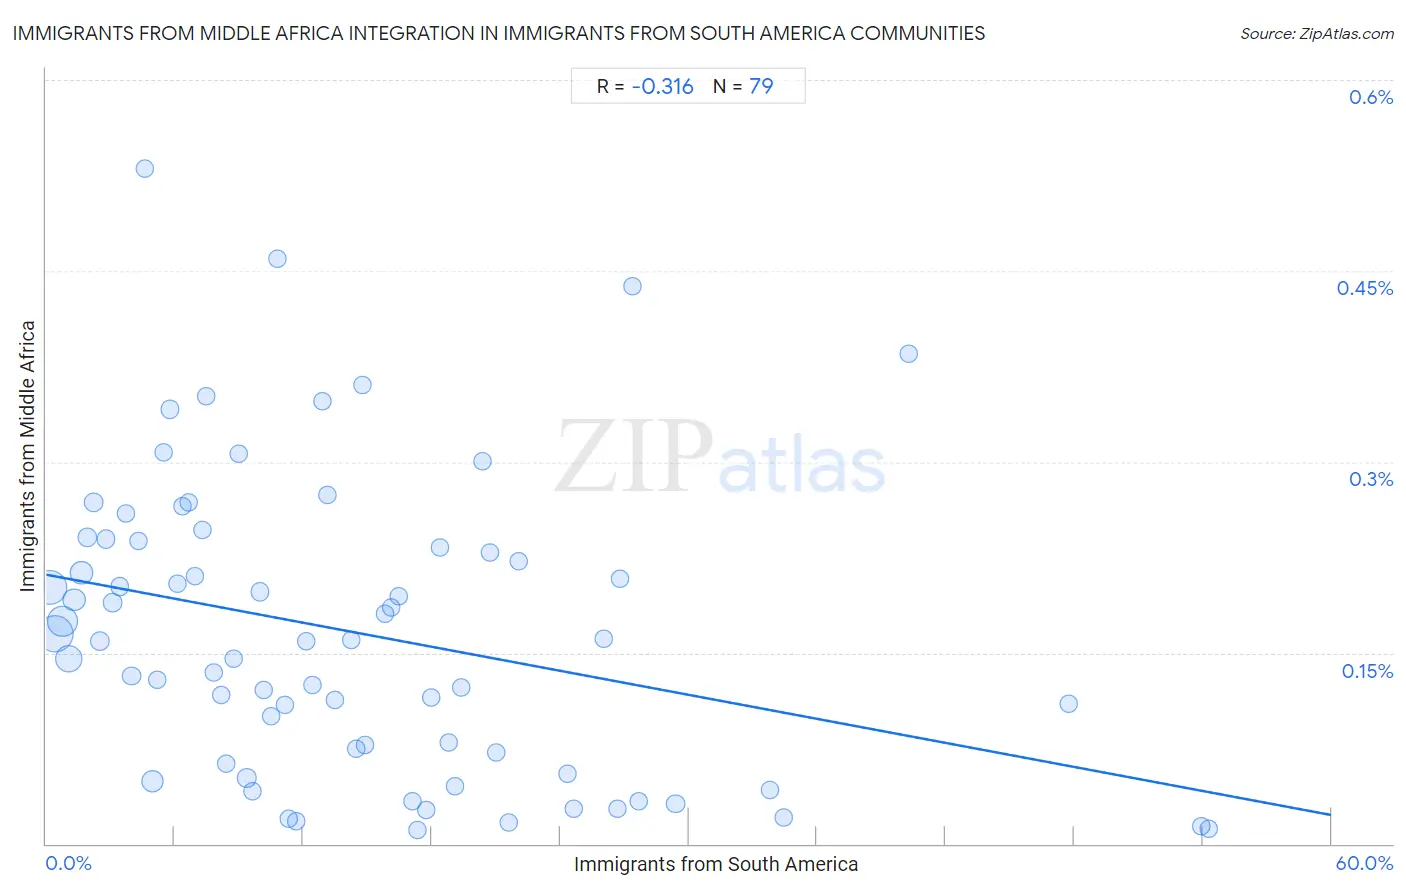 Immigrants from South America Integration in Immigrants from Middle Africa Communities